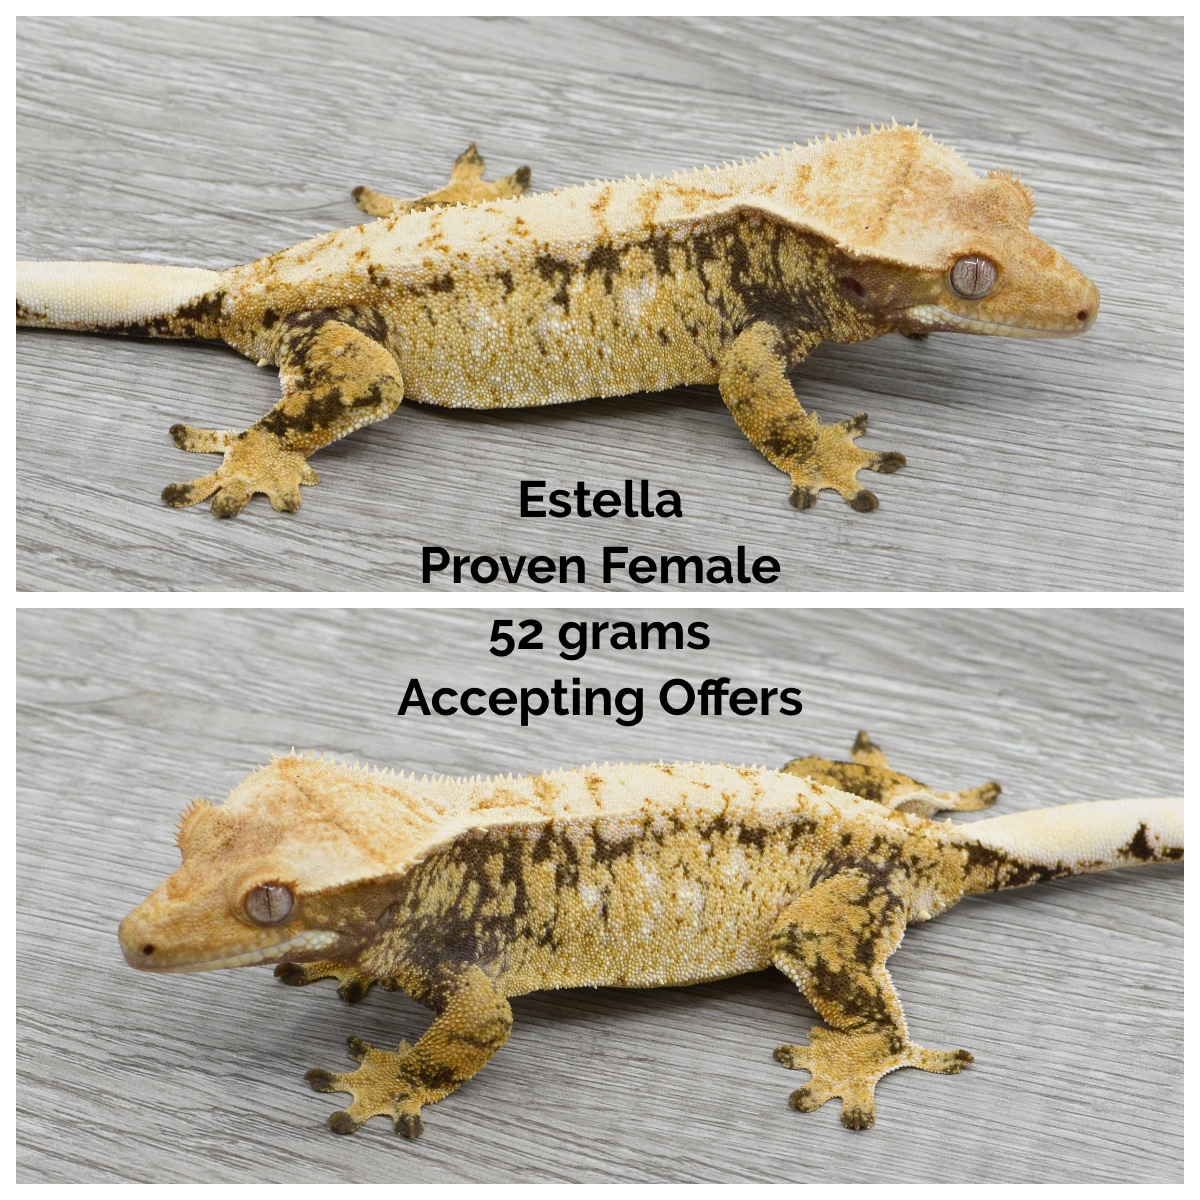 1Extreme Harlequin Crested Gecko by Kryptiles